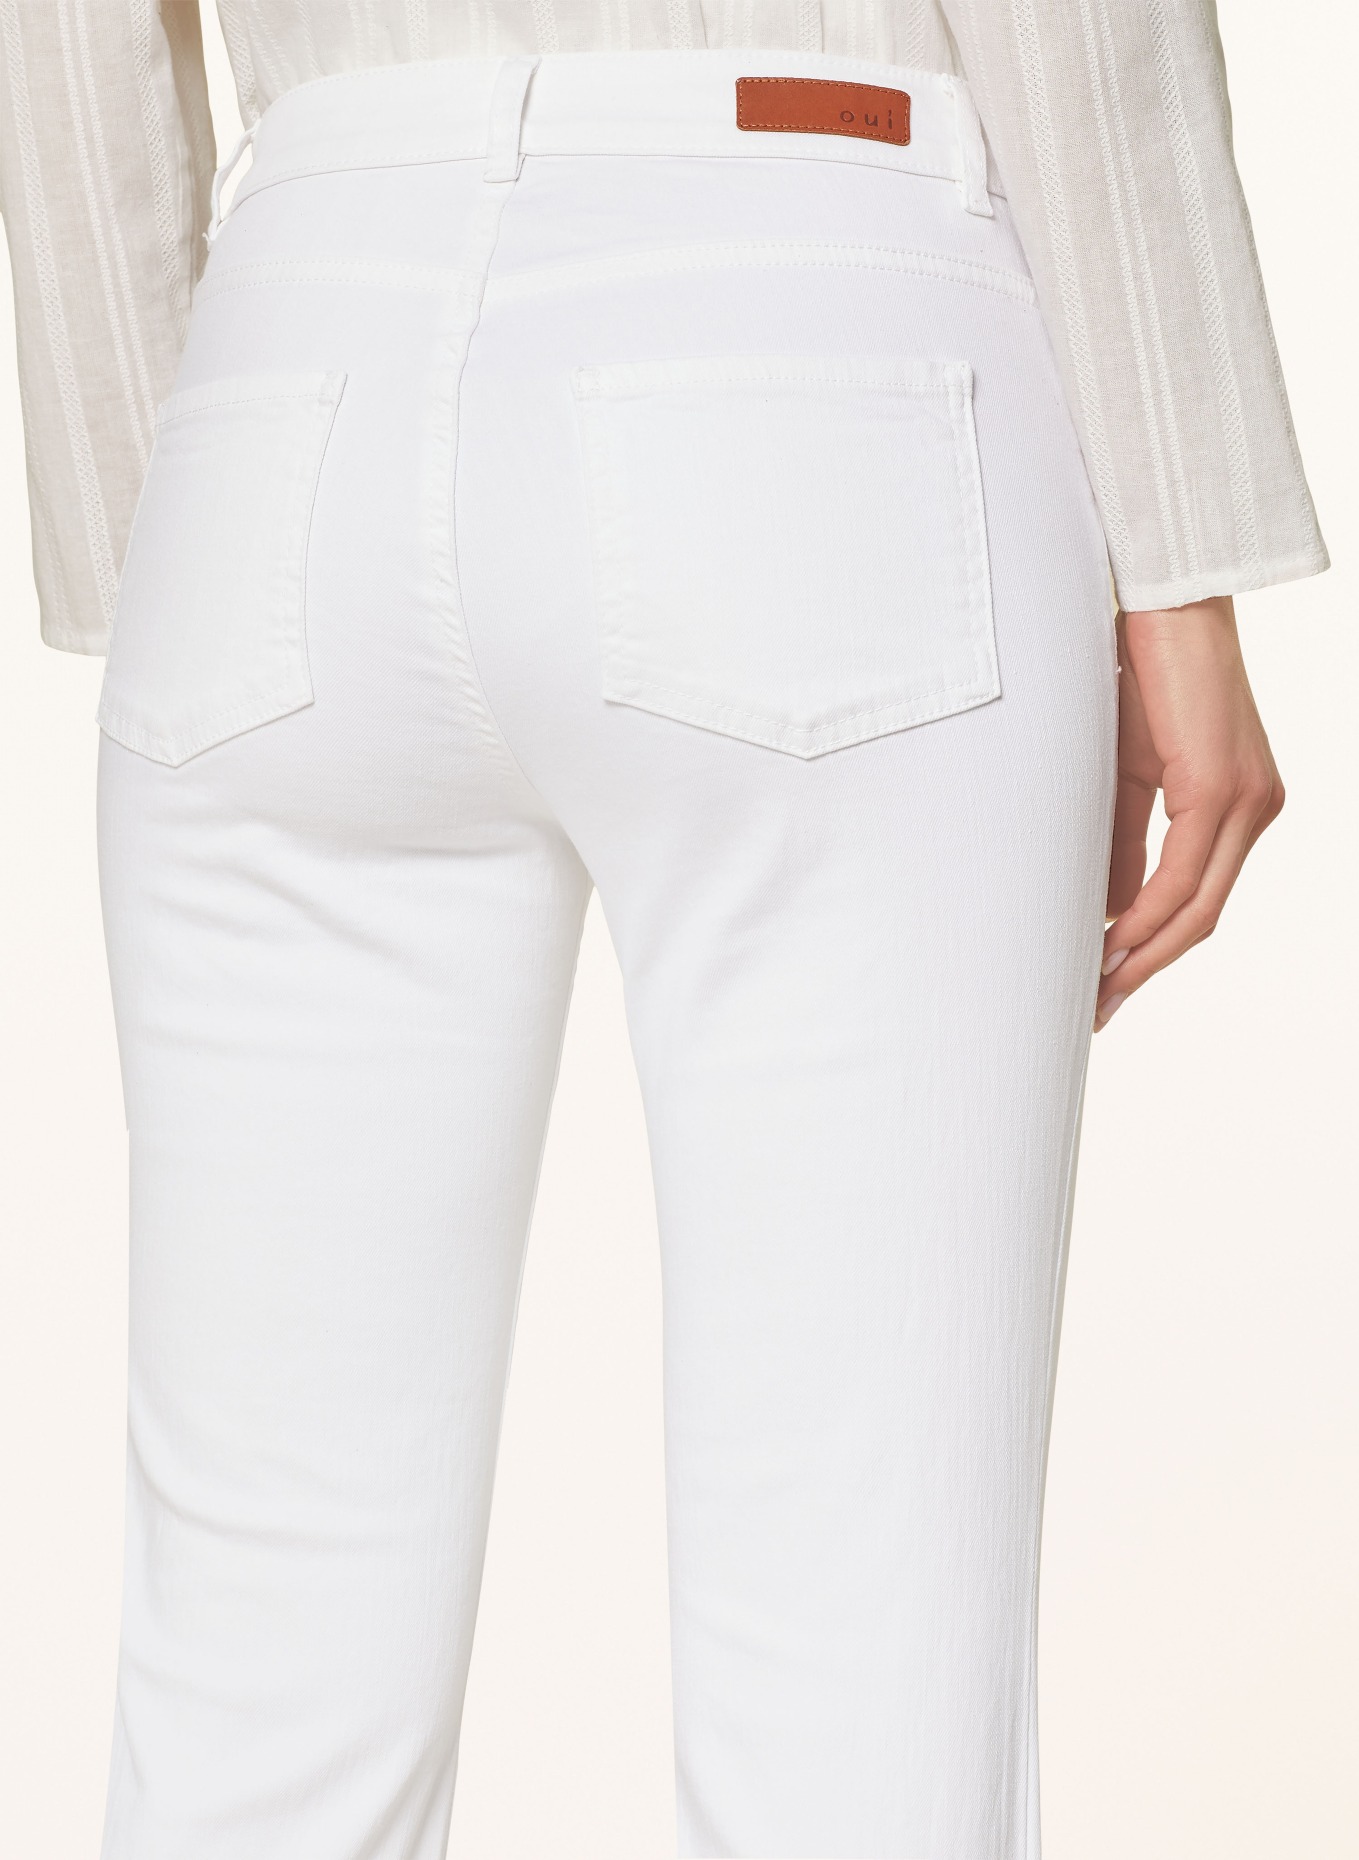 oui Flared Jeans, Farbe: WEISS (Bild 5)